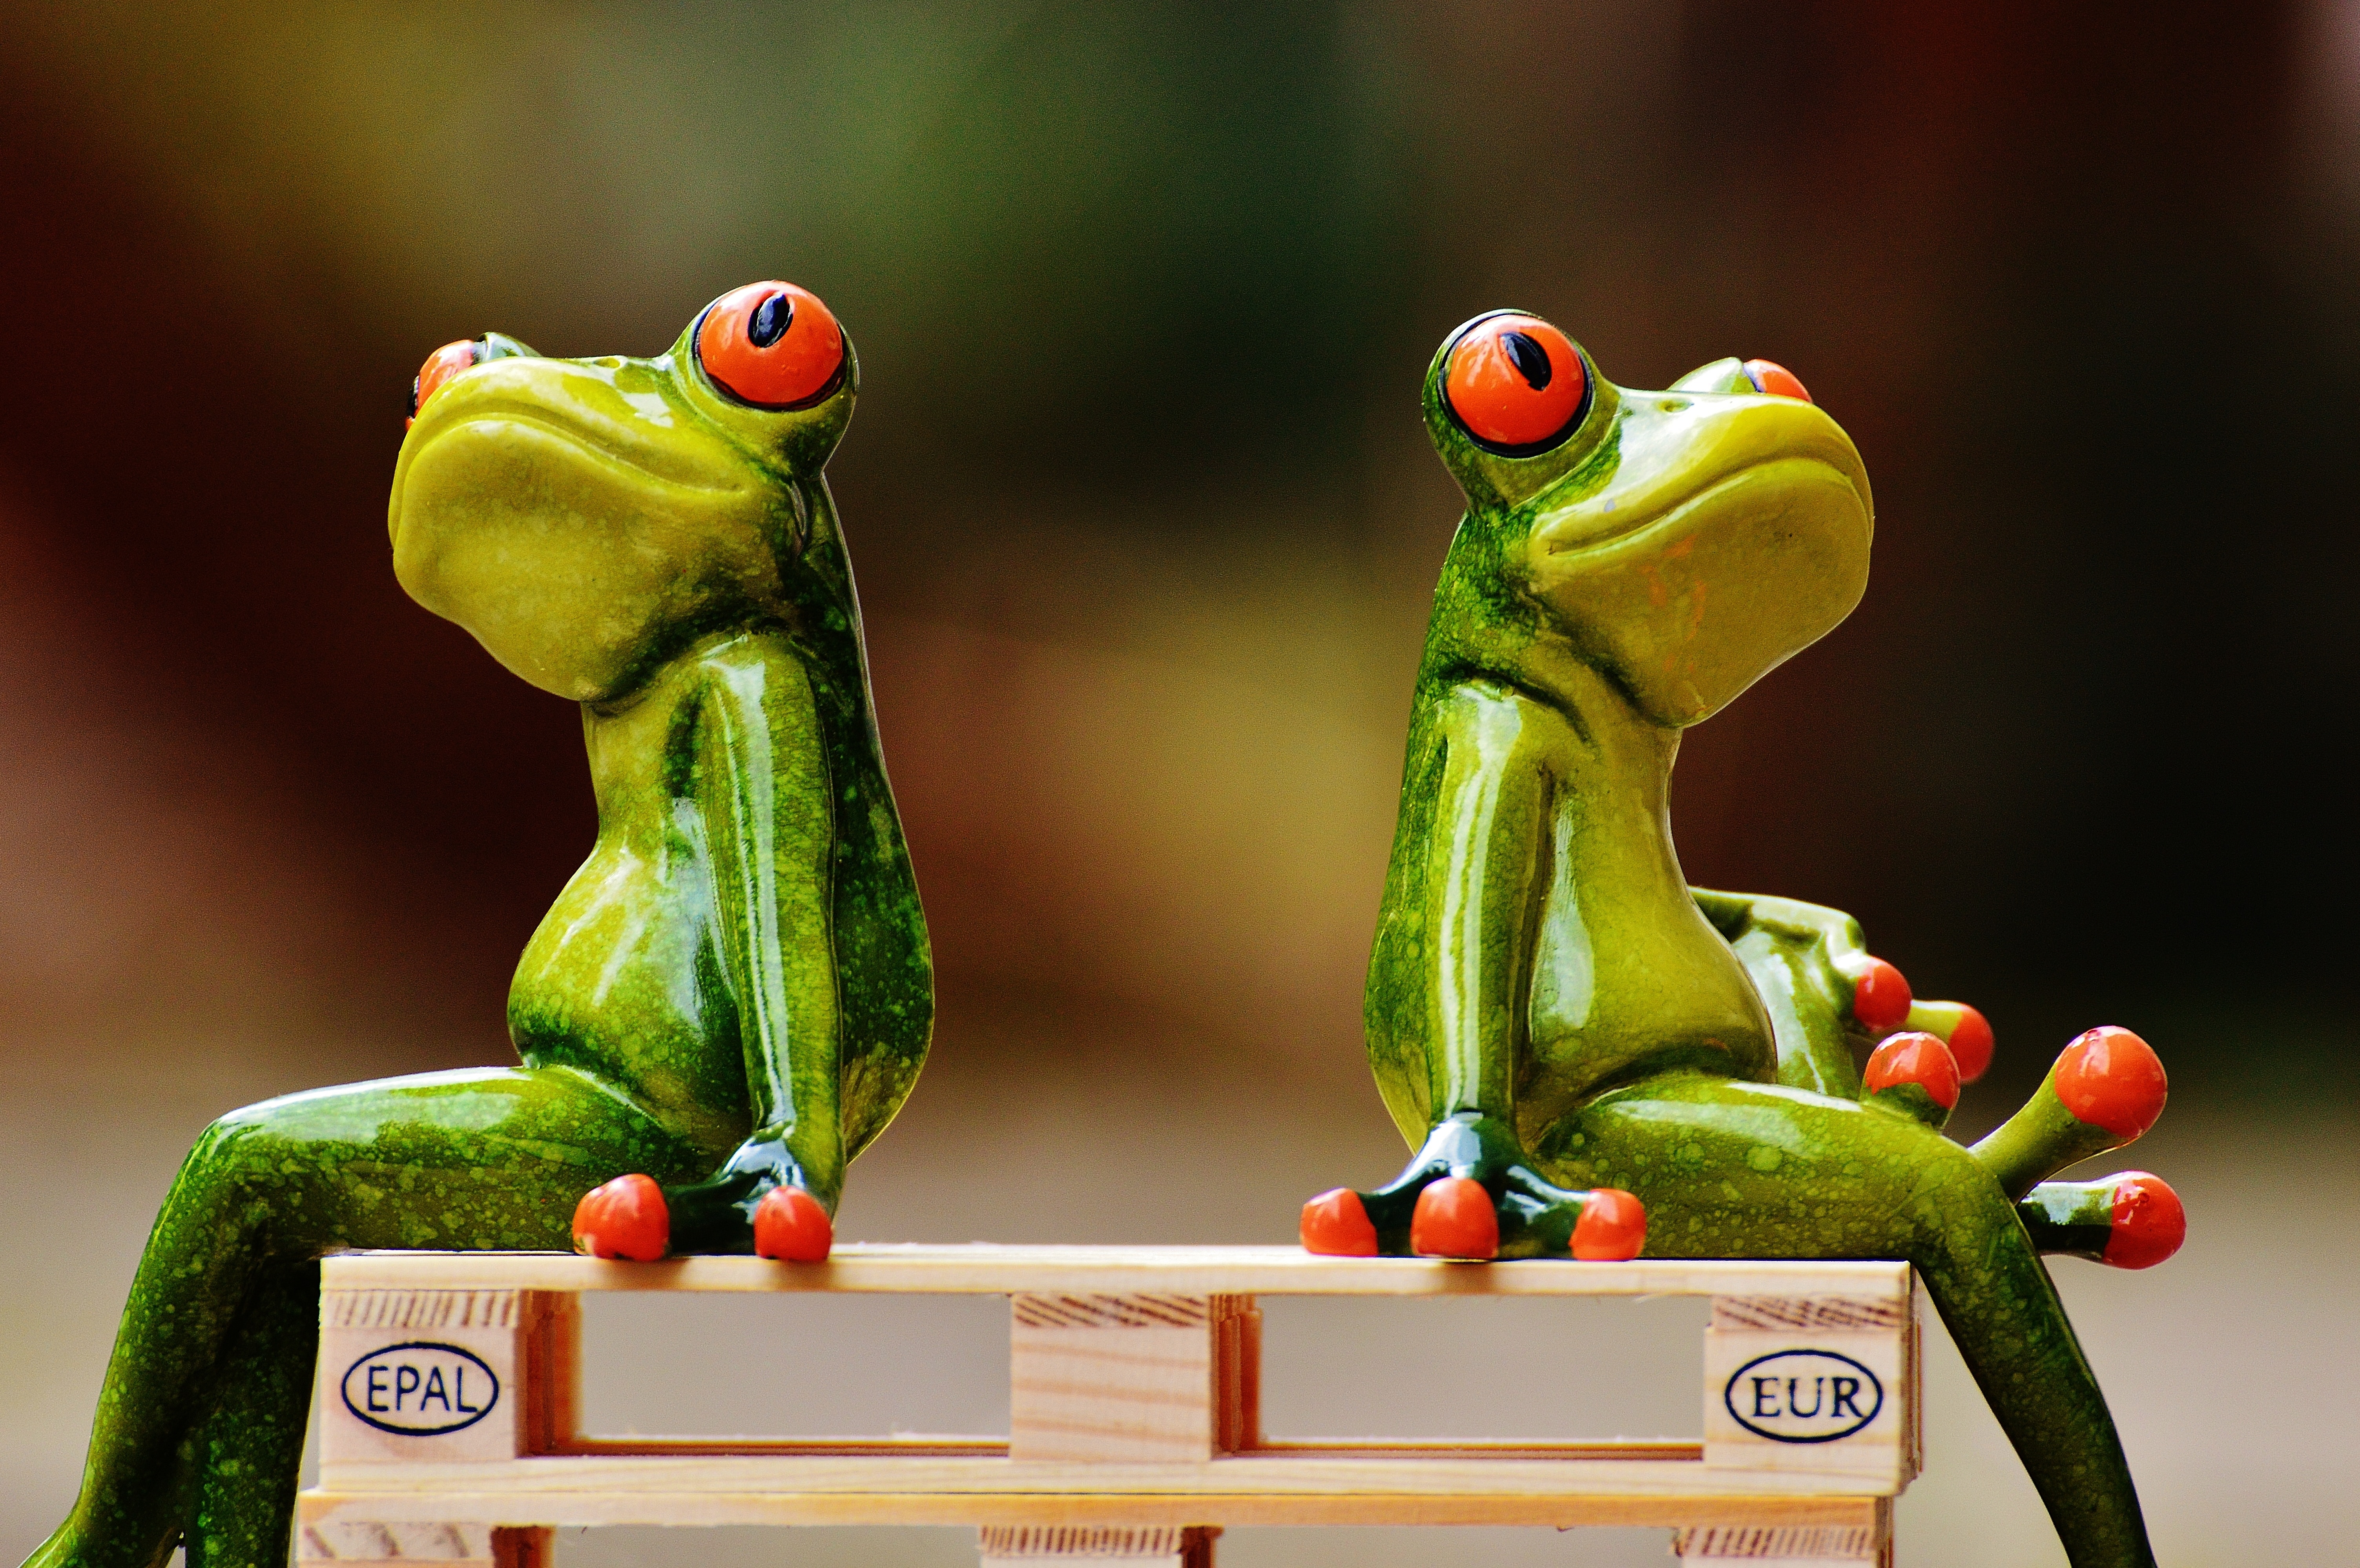 Friends, Sit, Pallets, Frogs, vegetable, healthy eating